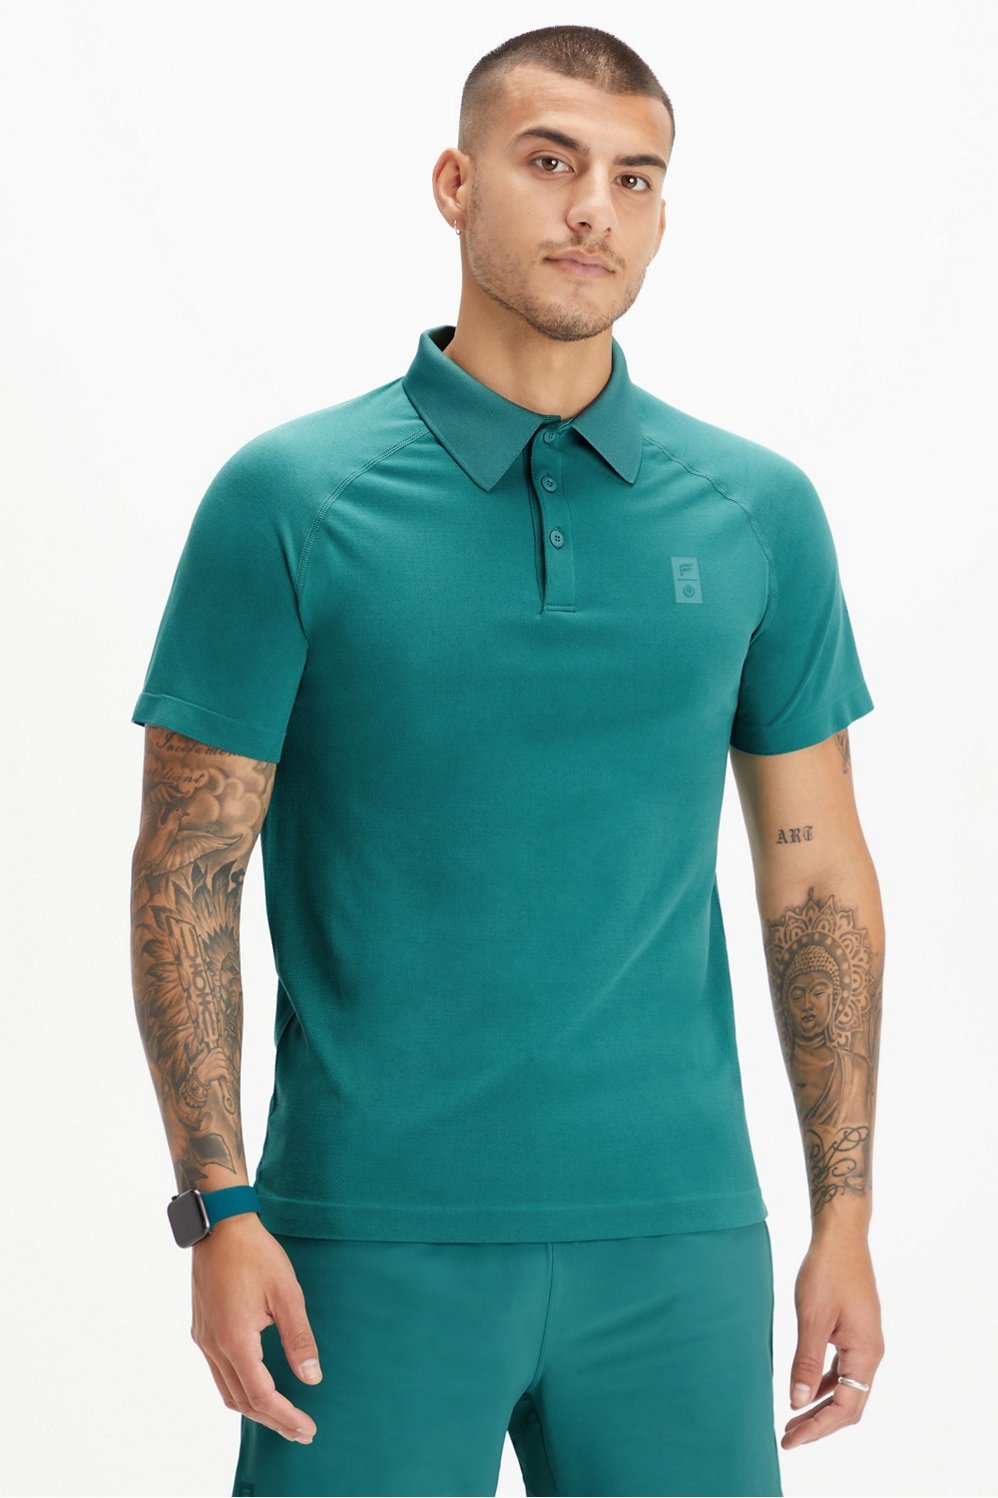 The Training Day Polo